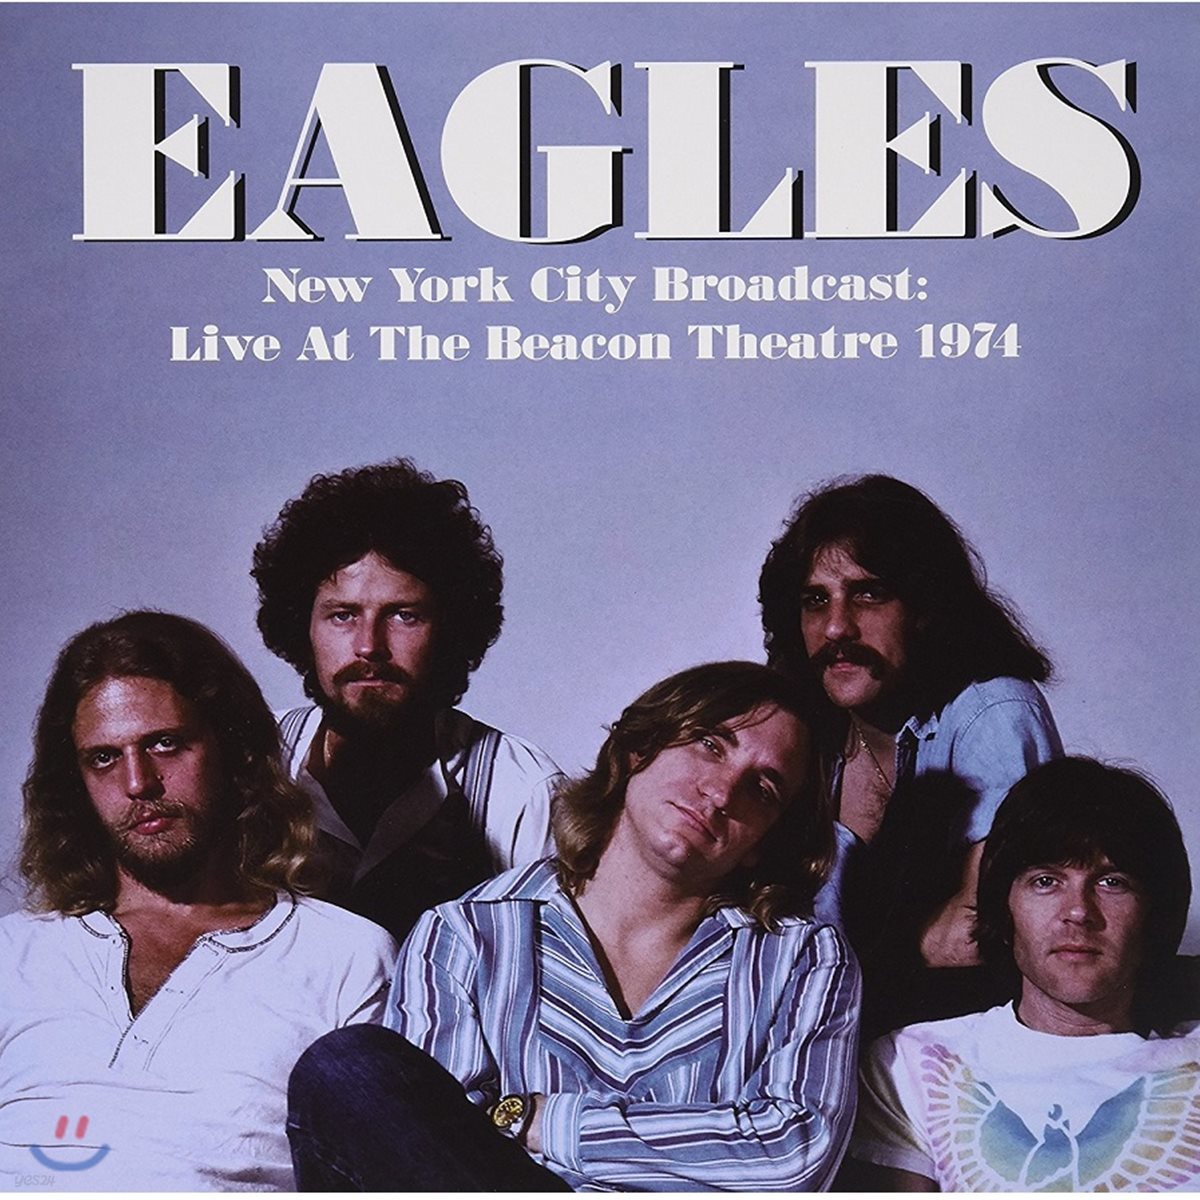 Eagles - New York City Broadcast: Live At The Beacon Theatre 1974 이글스 뉴욕 라이브 실황 [LP]